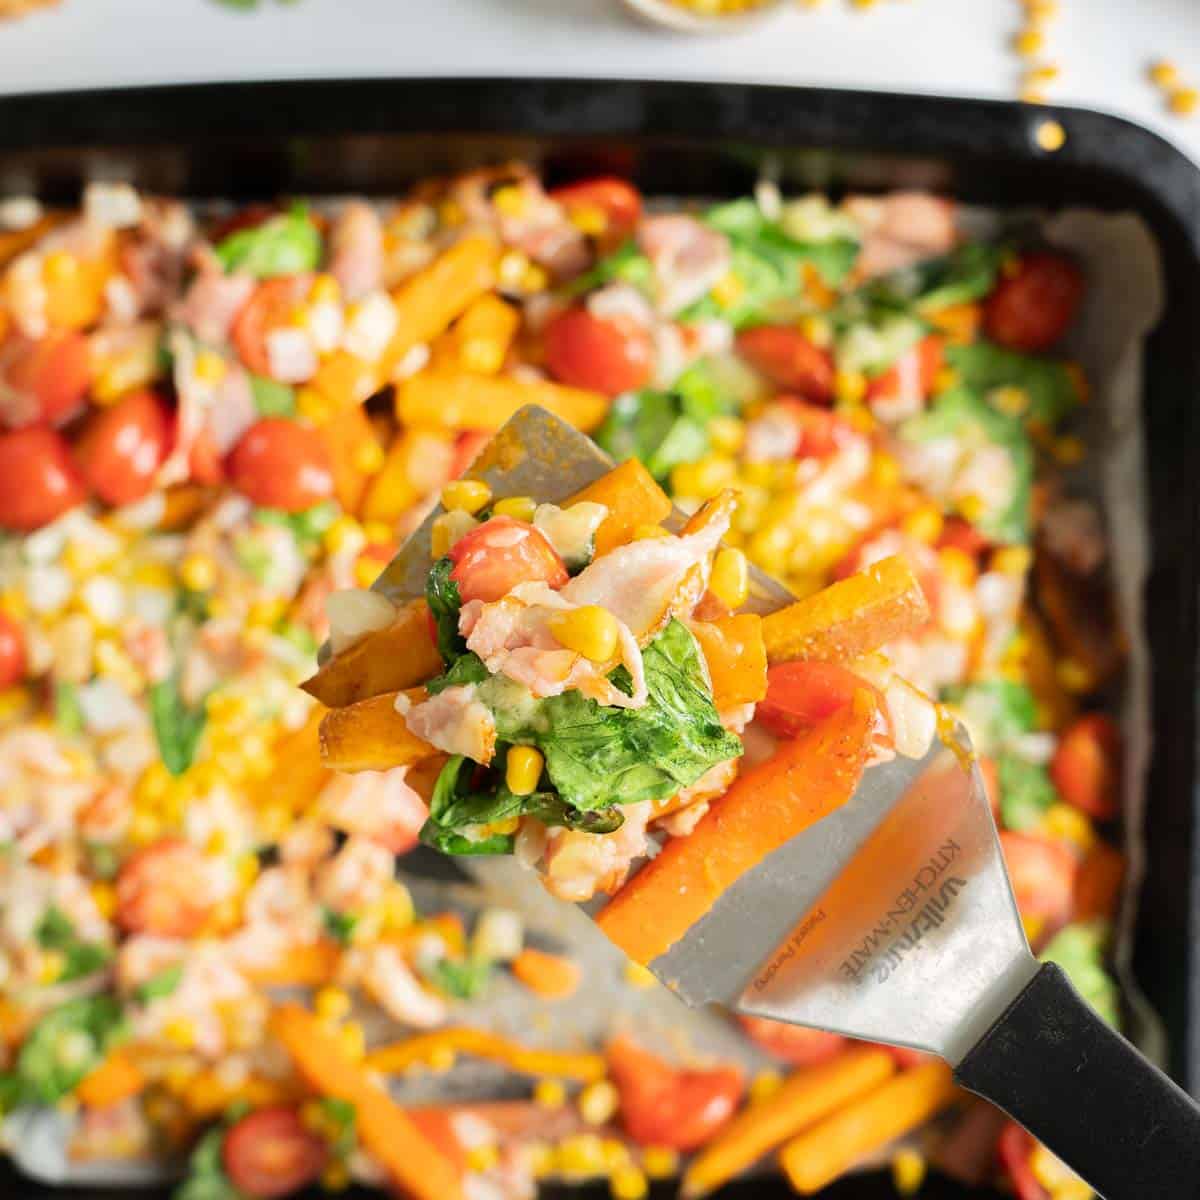 A serving of Loaded kumara fries being held above a tray of colourful vegetables